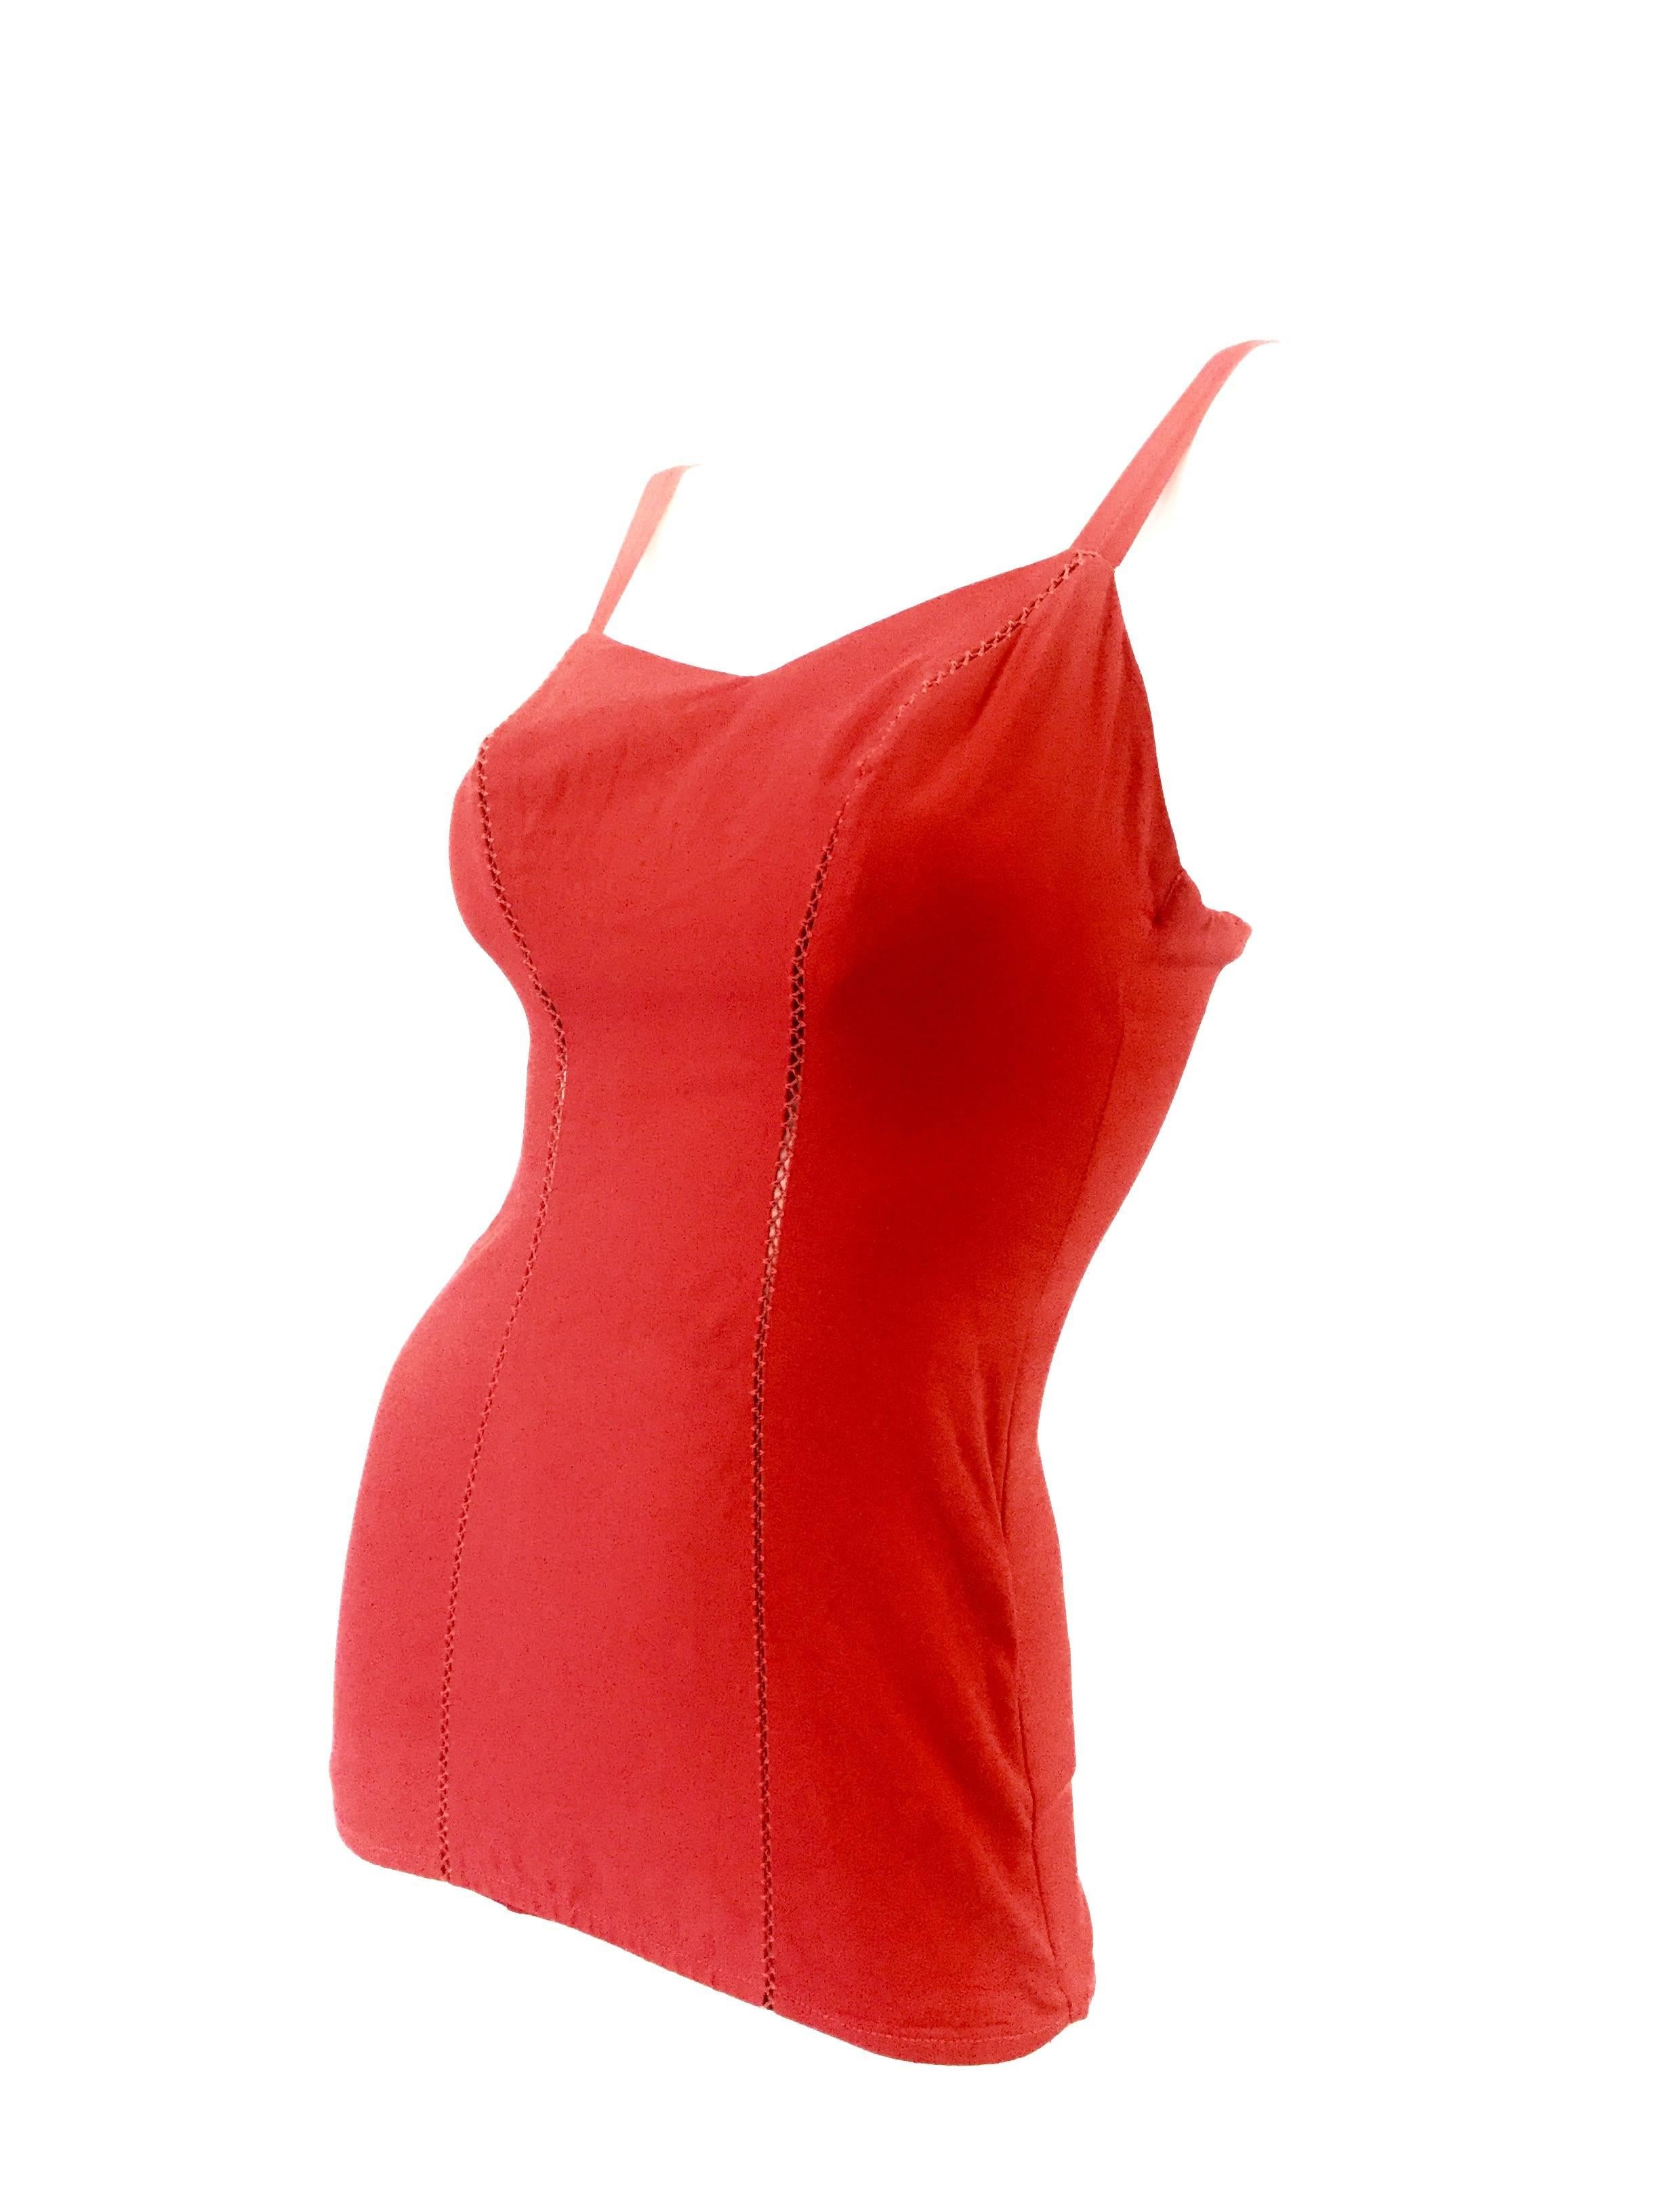 
Striking sweetheart swimsuit by Jantzen! This one piece suit is composed of several long panels of red fabric stitched together, leaving a gap between panels, but held together by an elaborate zigzag stitch. There is a bandeau strip on the bust,